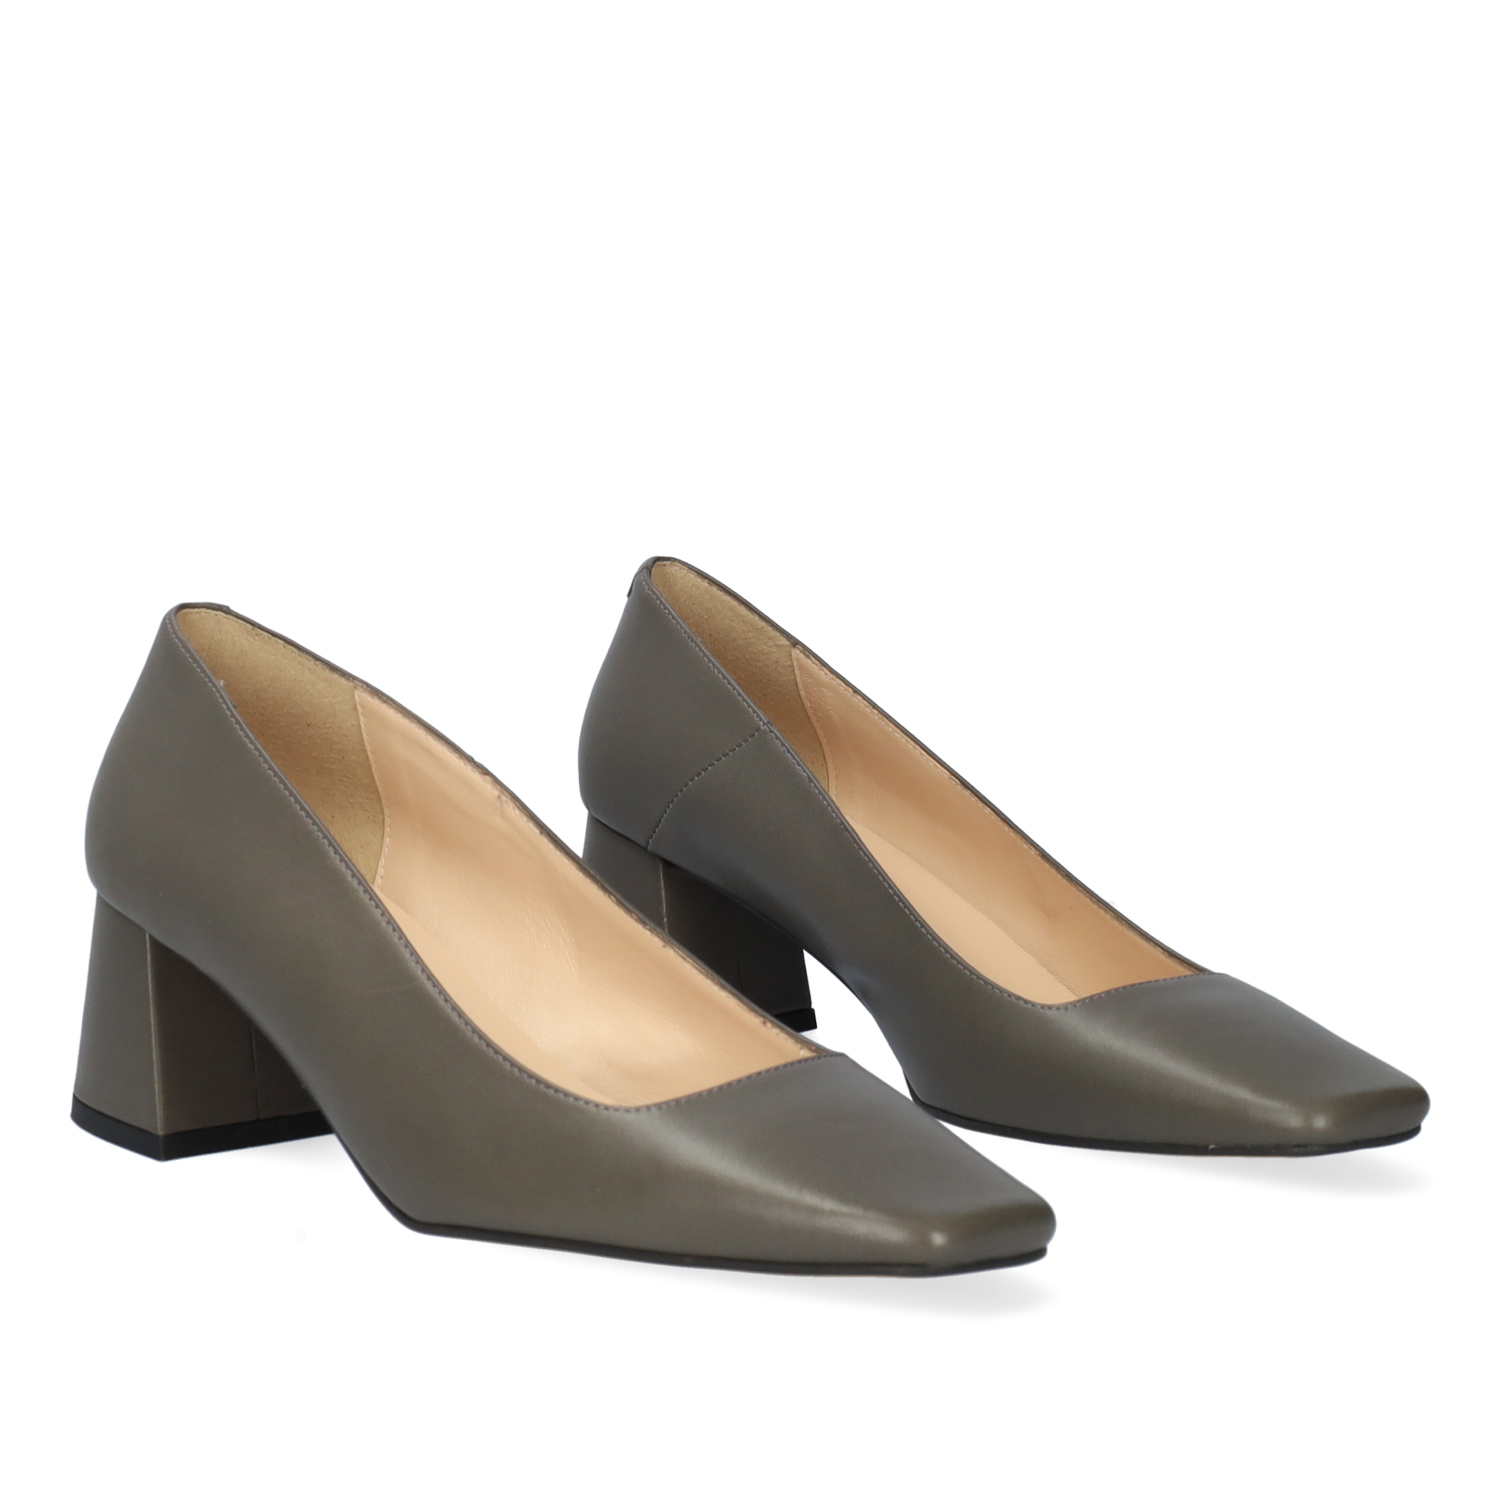 Heeled shoe in grey leather 